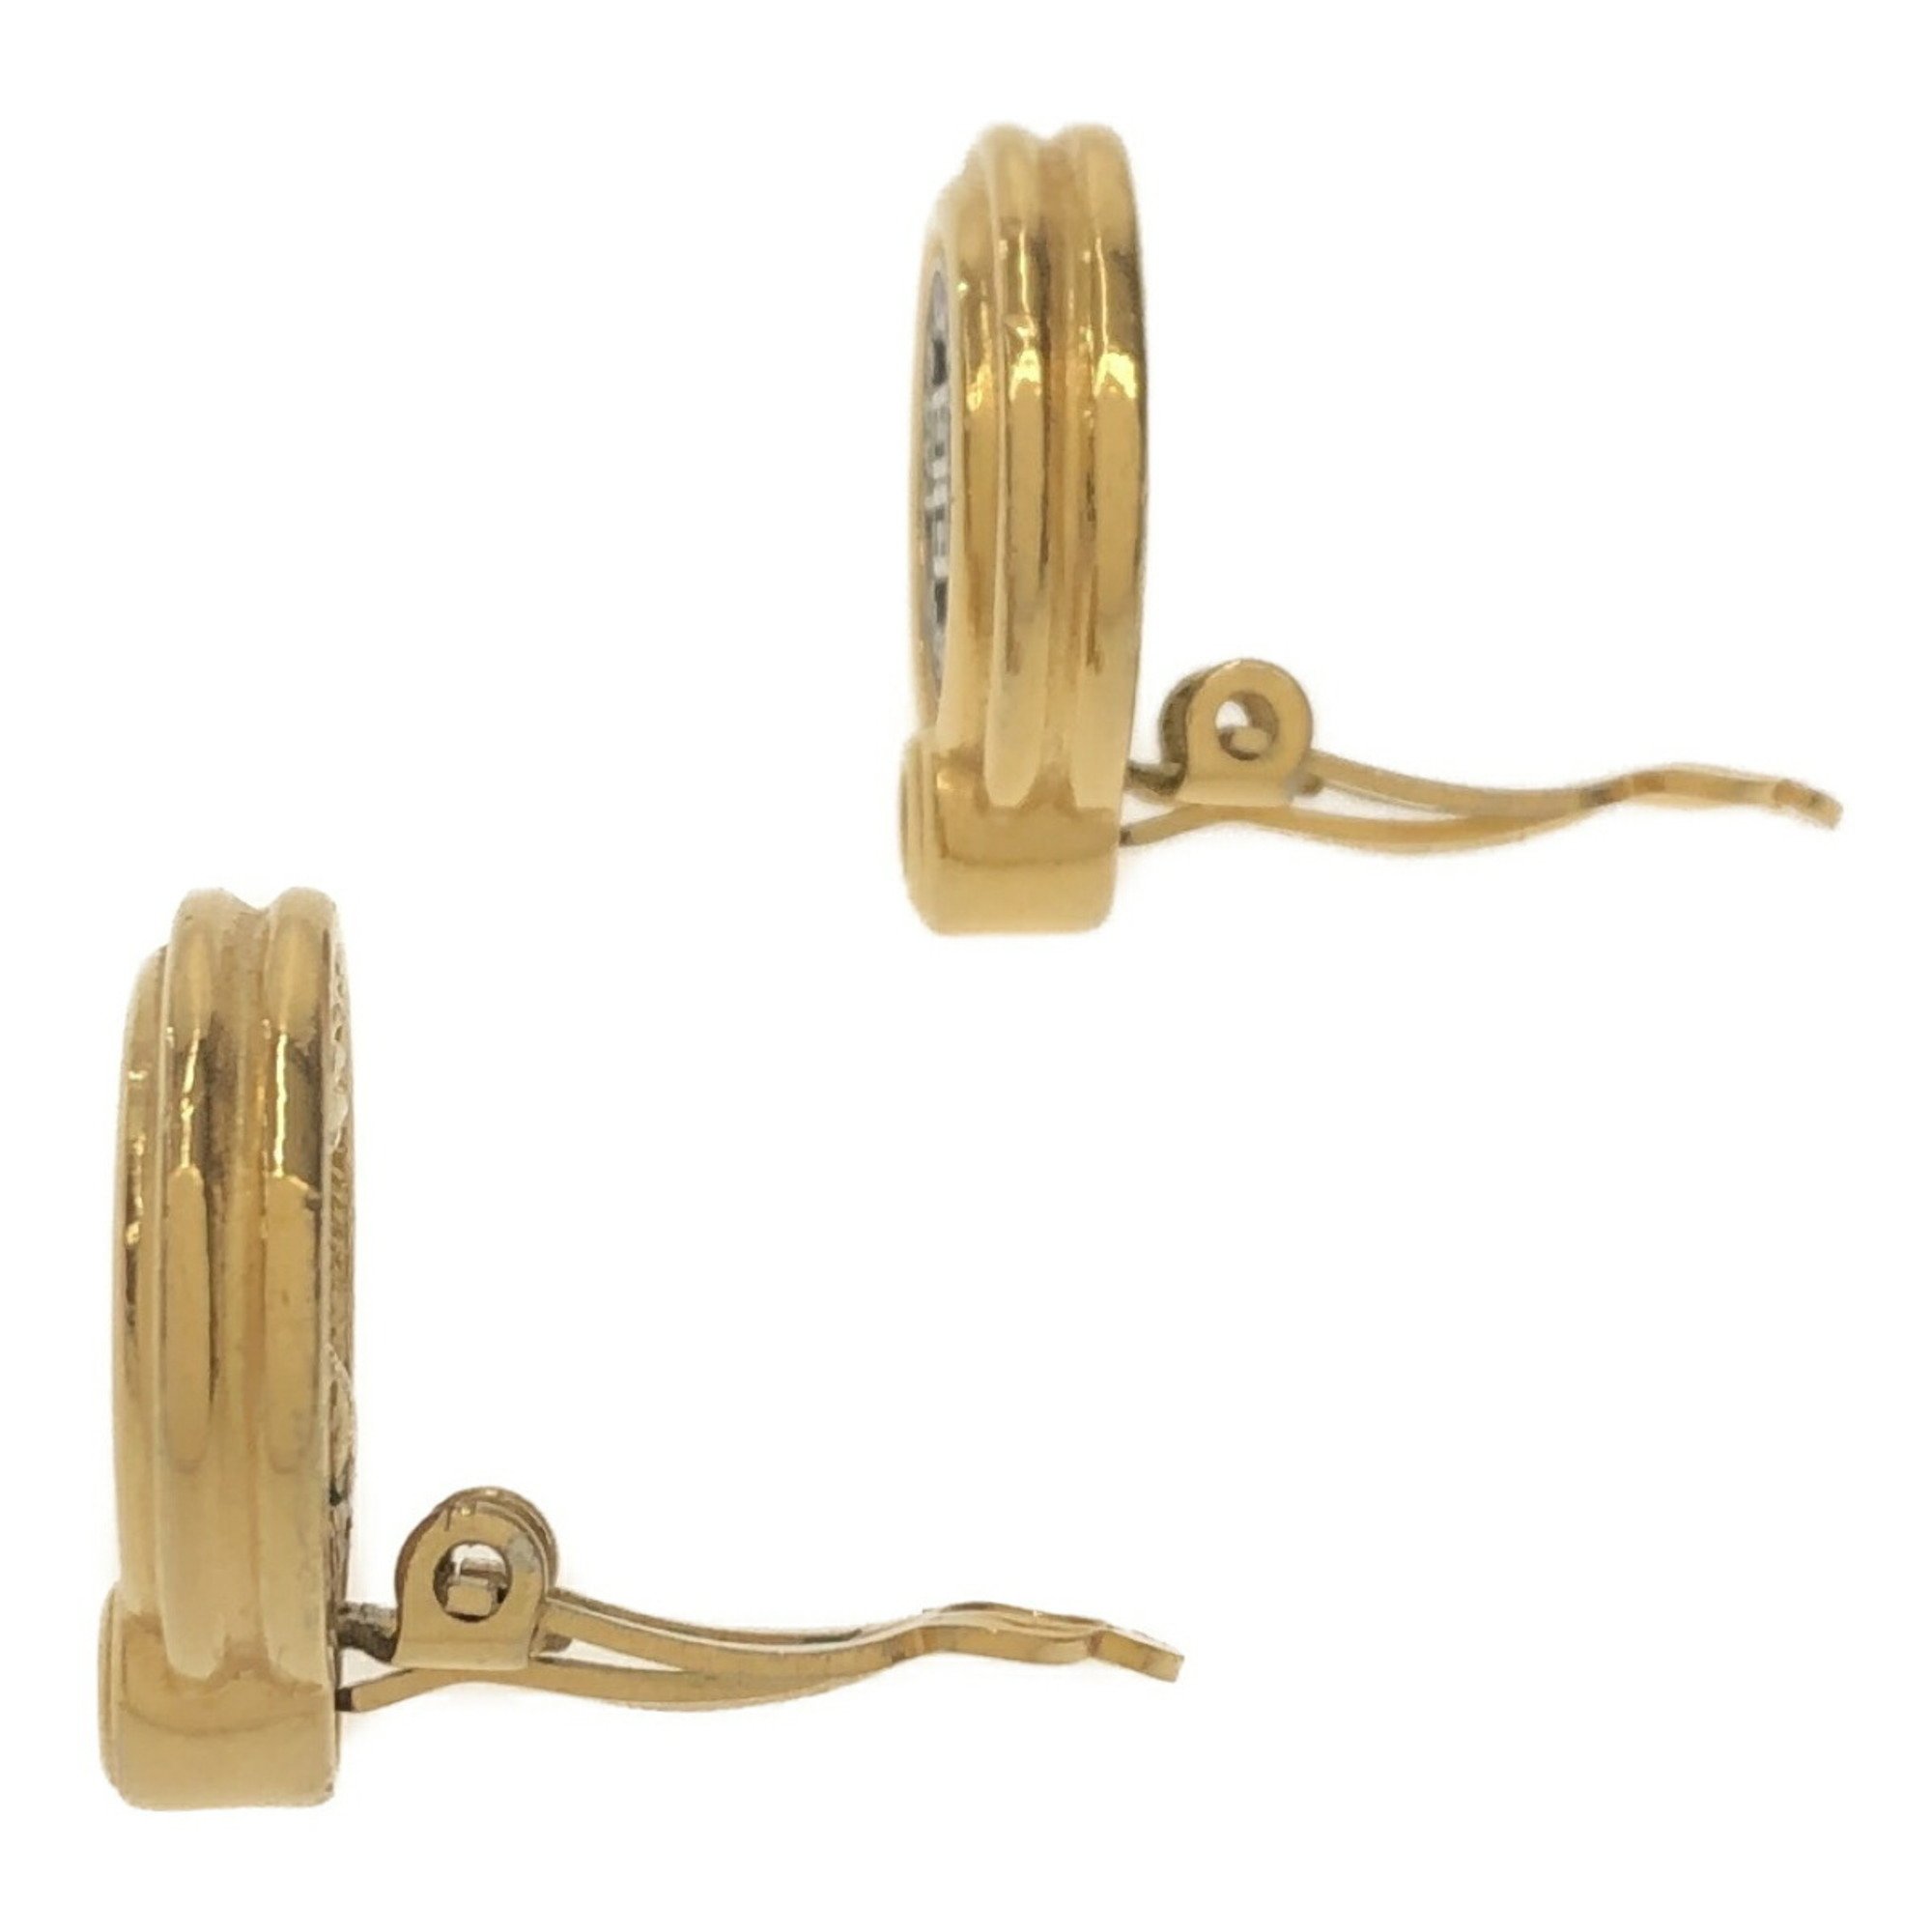 GIVENCHY Combi Earrings Accessories Women's Gold VINTAGE OLD ITL2M4JB3EI8 RM2891M